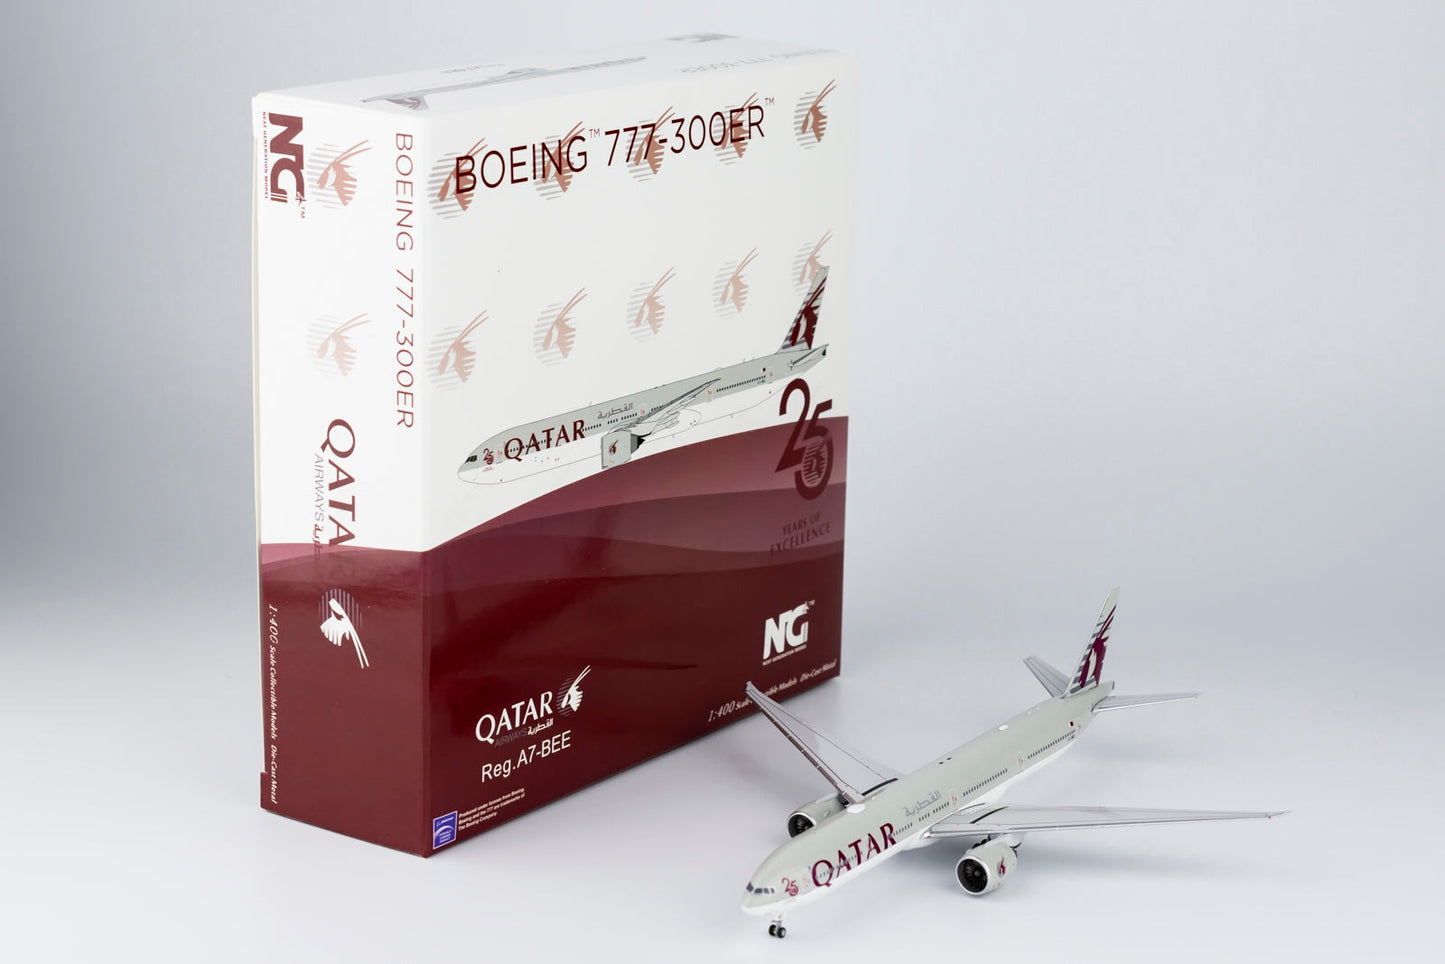 1/400 Qatar Airways B 777-300ER "25 Years of Excellence" NG Models 73010